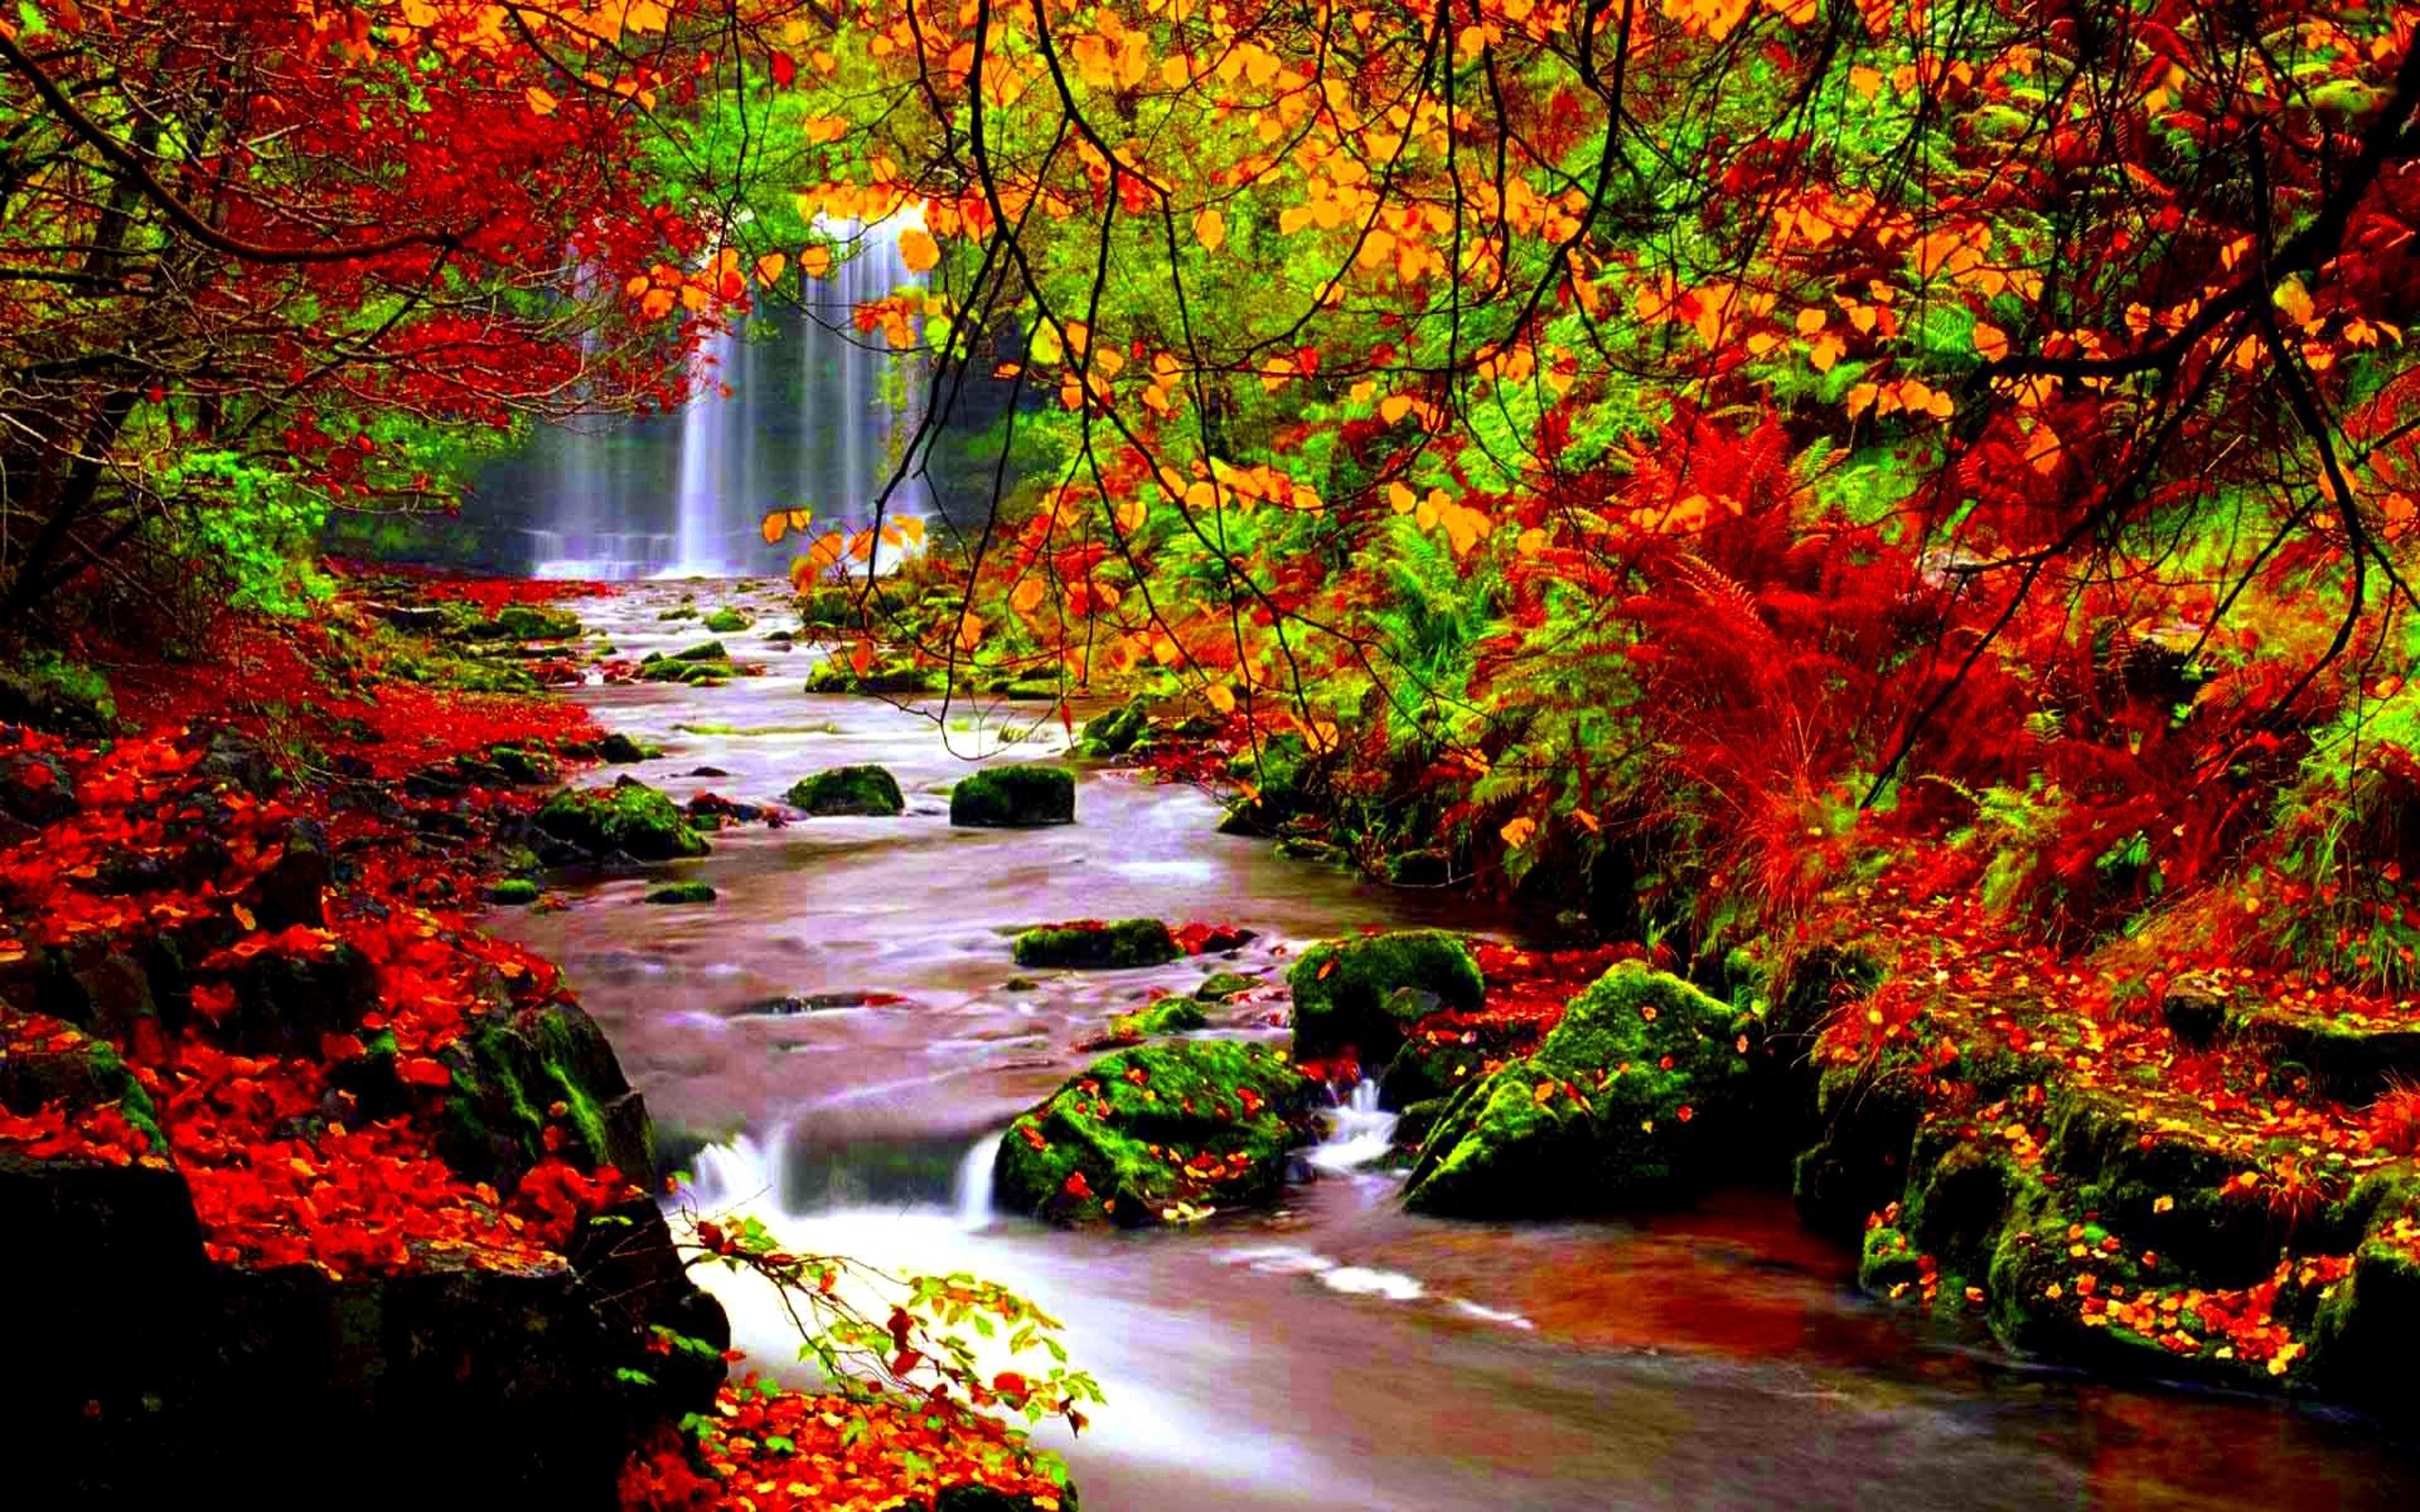 2560x1600 Autumn scenery stream river in autumn-trees with red leaves falling leaves  Desktop Hd Wallpaper 2560Ã1600